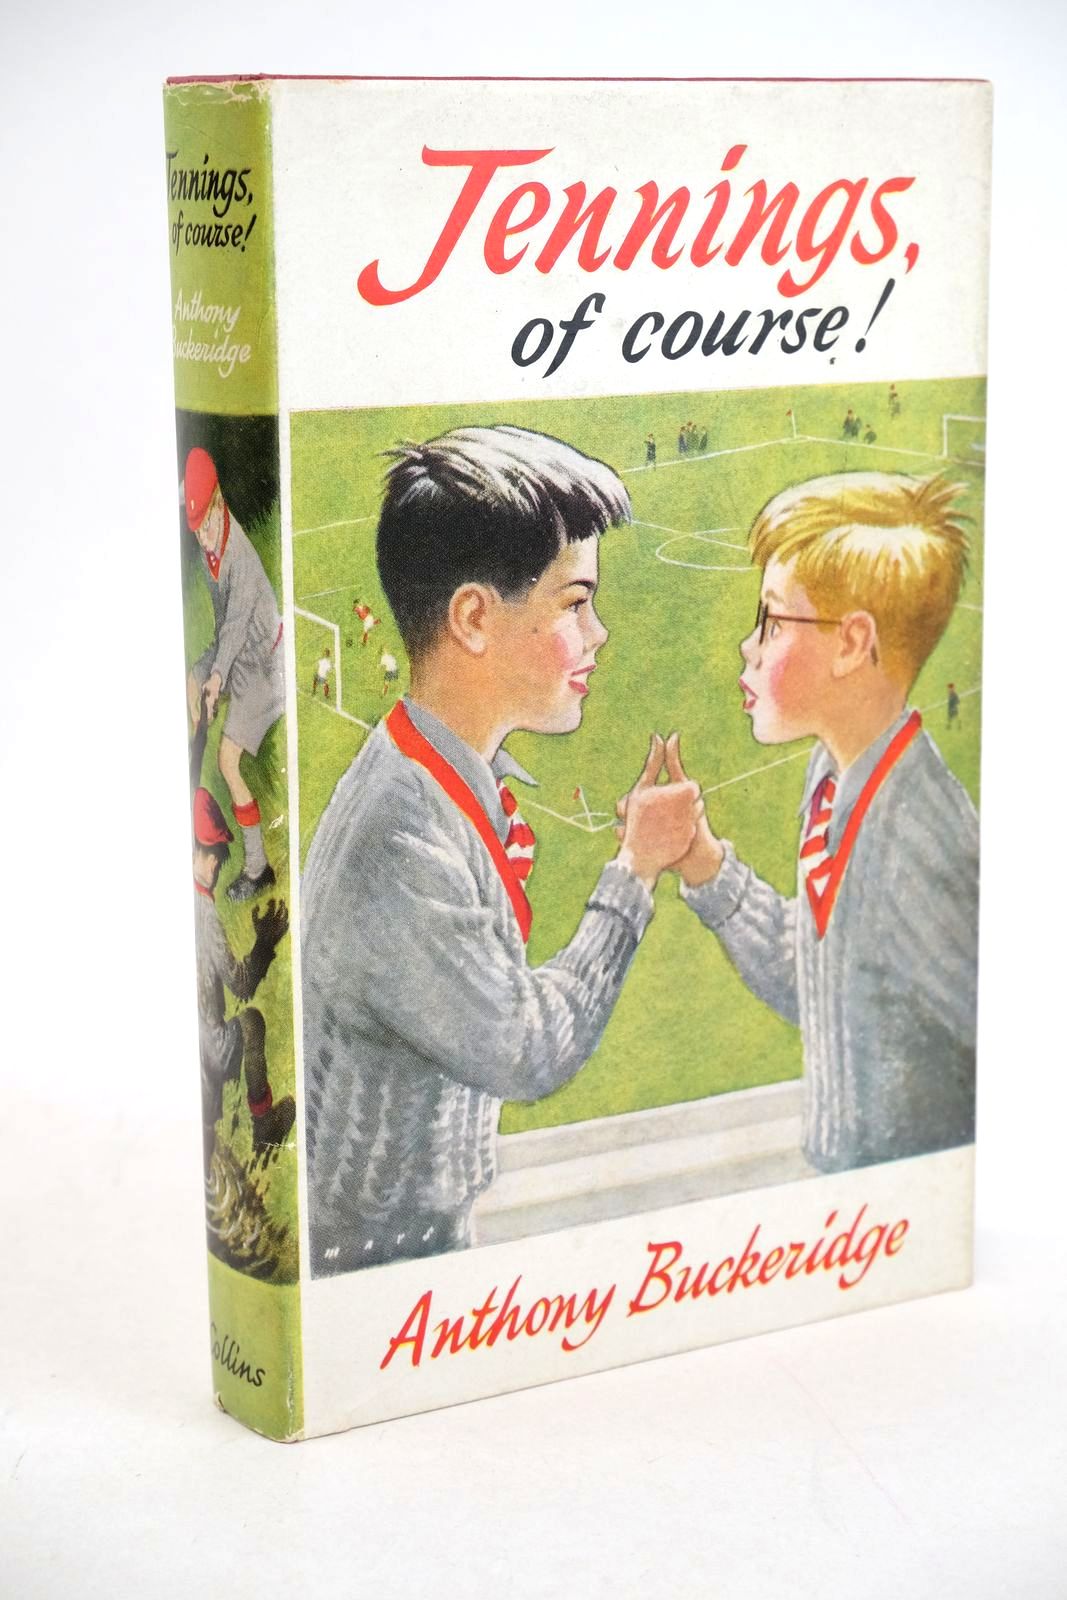 Photo of JENNINGS, OF COURSE! written by Buckeridge, Anthony illustrated by Mays, published by Collins (STOCK CODE: 1327518)  for sale by Stella & Rose's Books